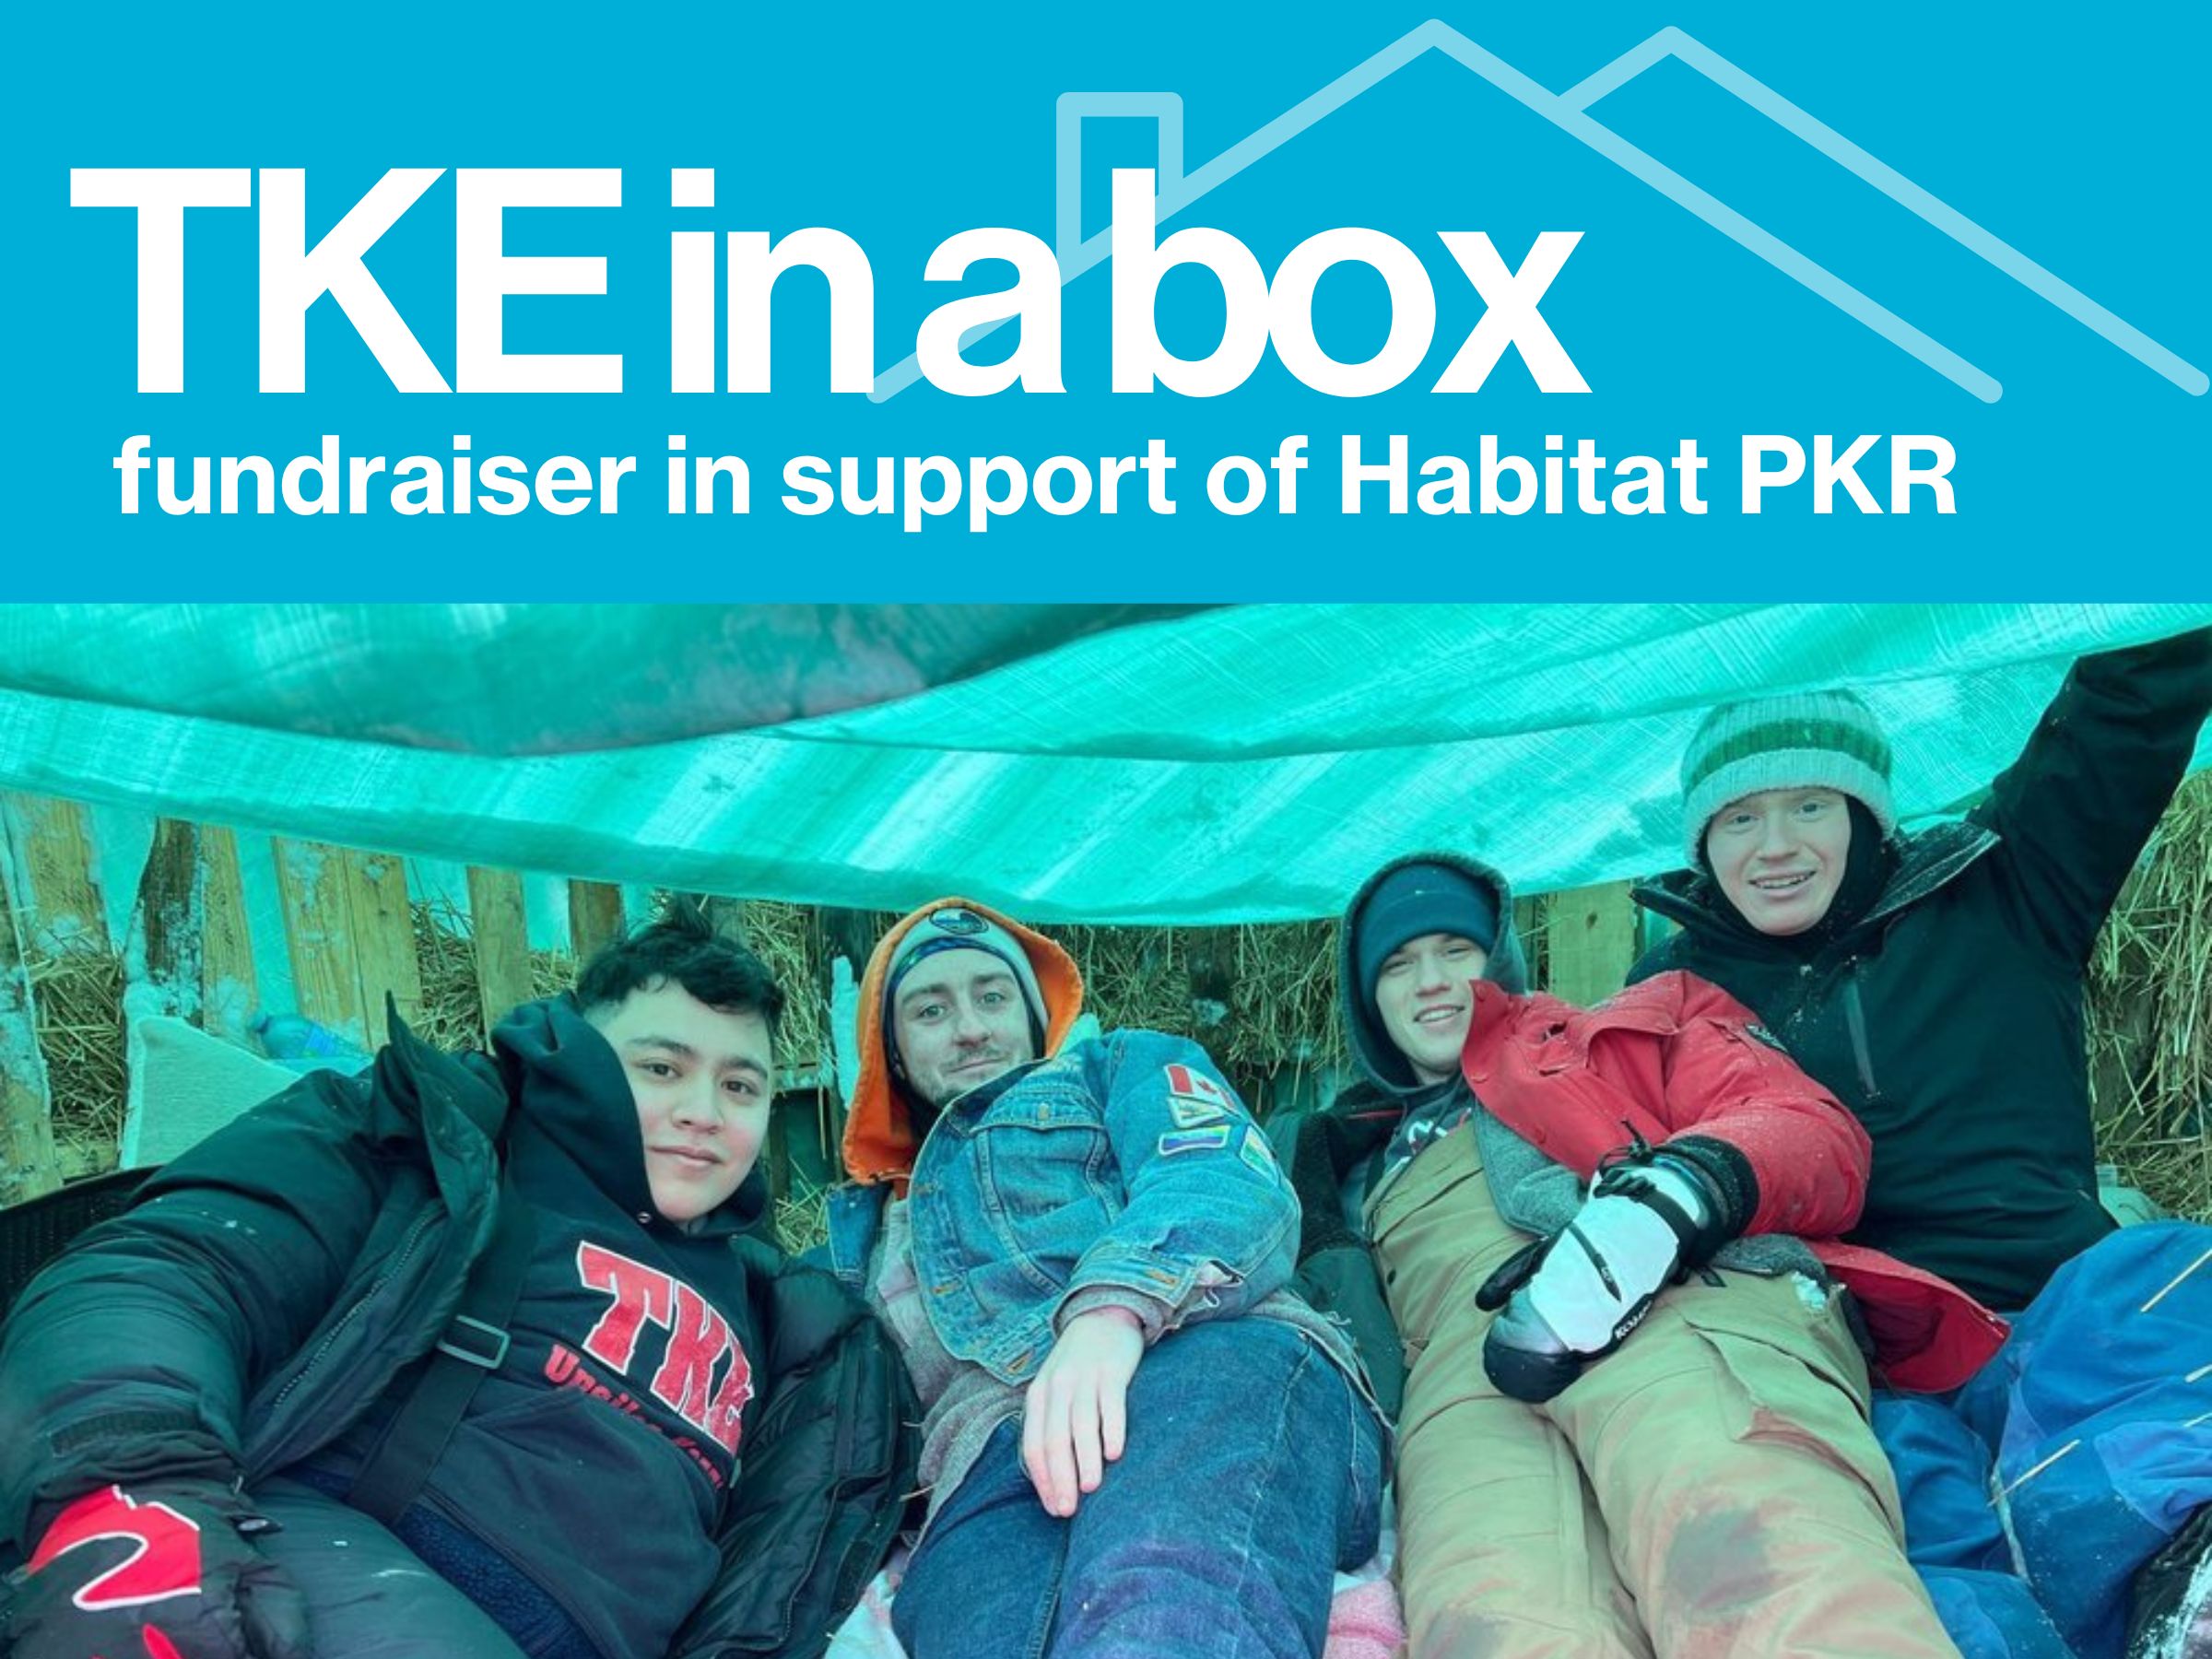 TKE student fraternity to campout in downtown Peterborough on Feb 10-12 to raise funds and awareness for Habitat for Humanity Peterborough & Kawartha Region